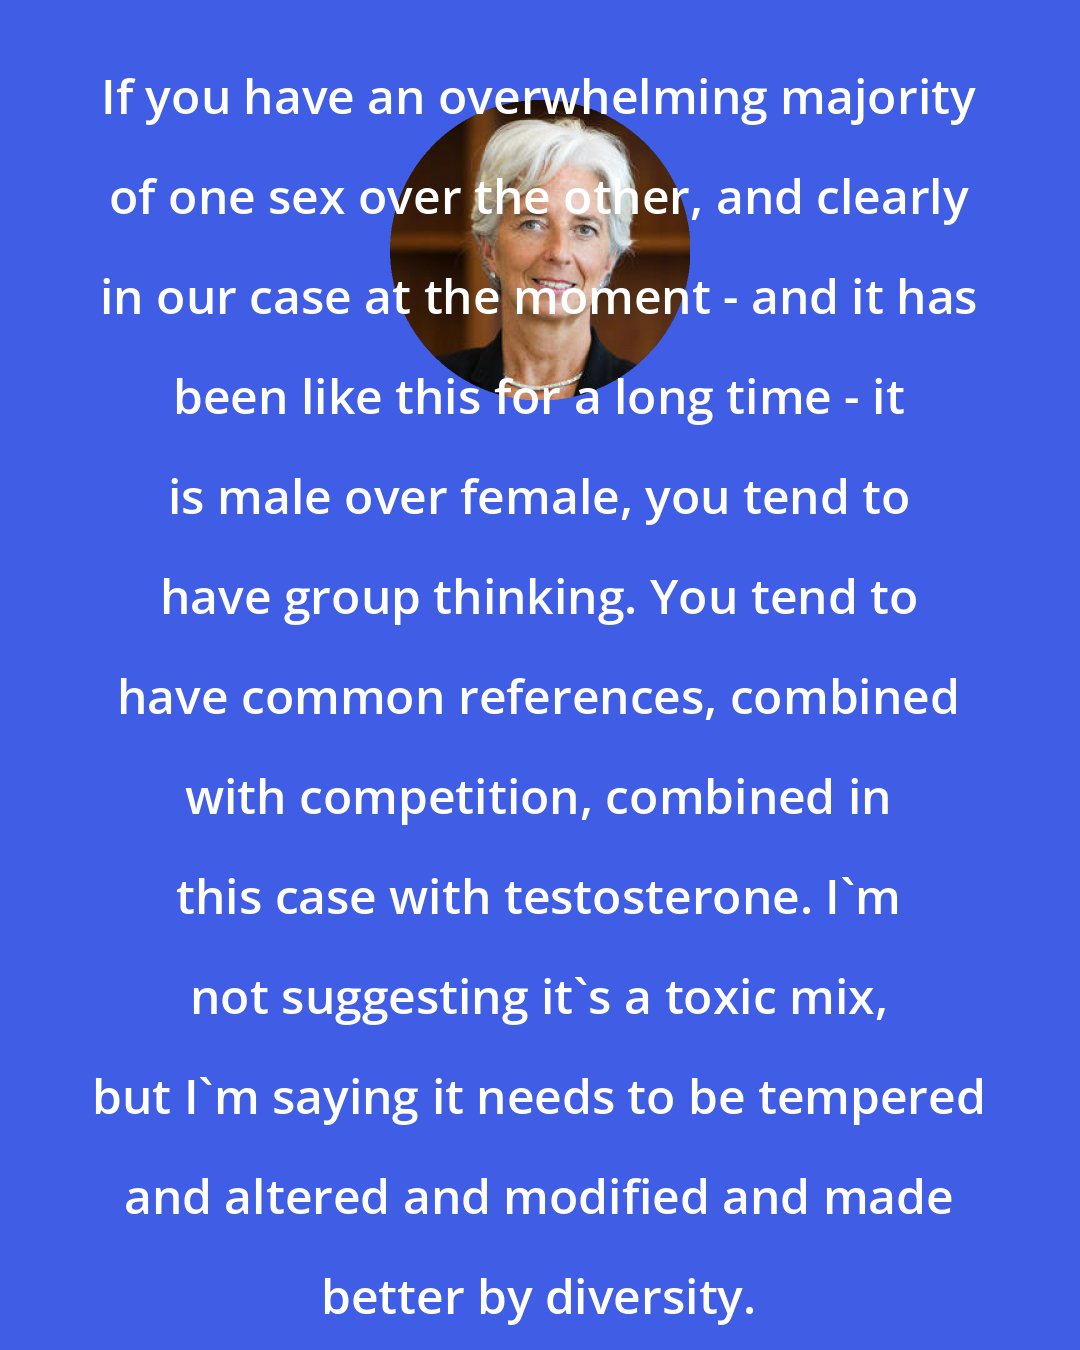 Christine Lagarde: If you have an overwhelming majority of one sex over the other, and clearly in our case at the moment - and it has been like this for a long time - it is male over female, you tend to have group thinking. You tend to have common references, combined with competition, combined in this case with testosterone. I'm not suggesting it's a toxic mix, but I'm saying it needs to be tempered and altered and modified and made better by diversity.